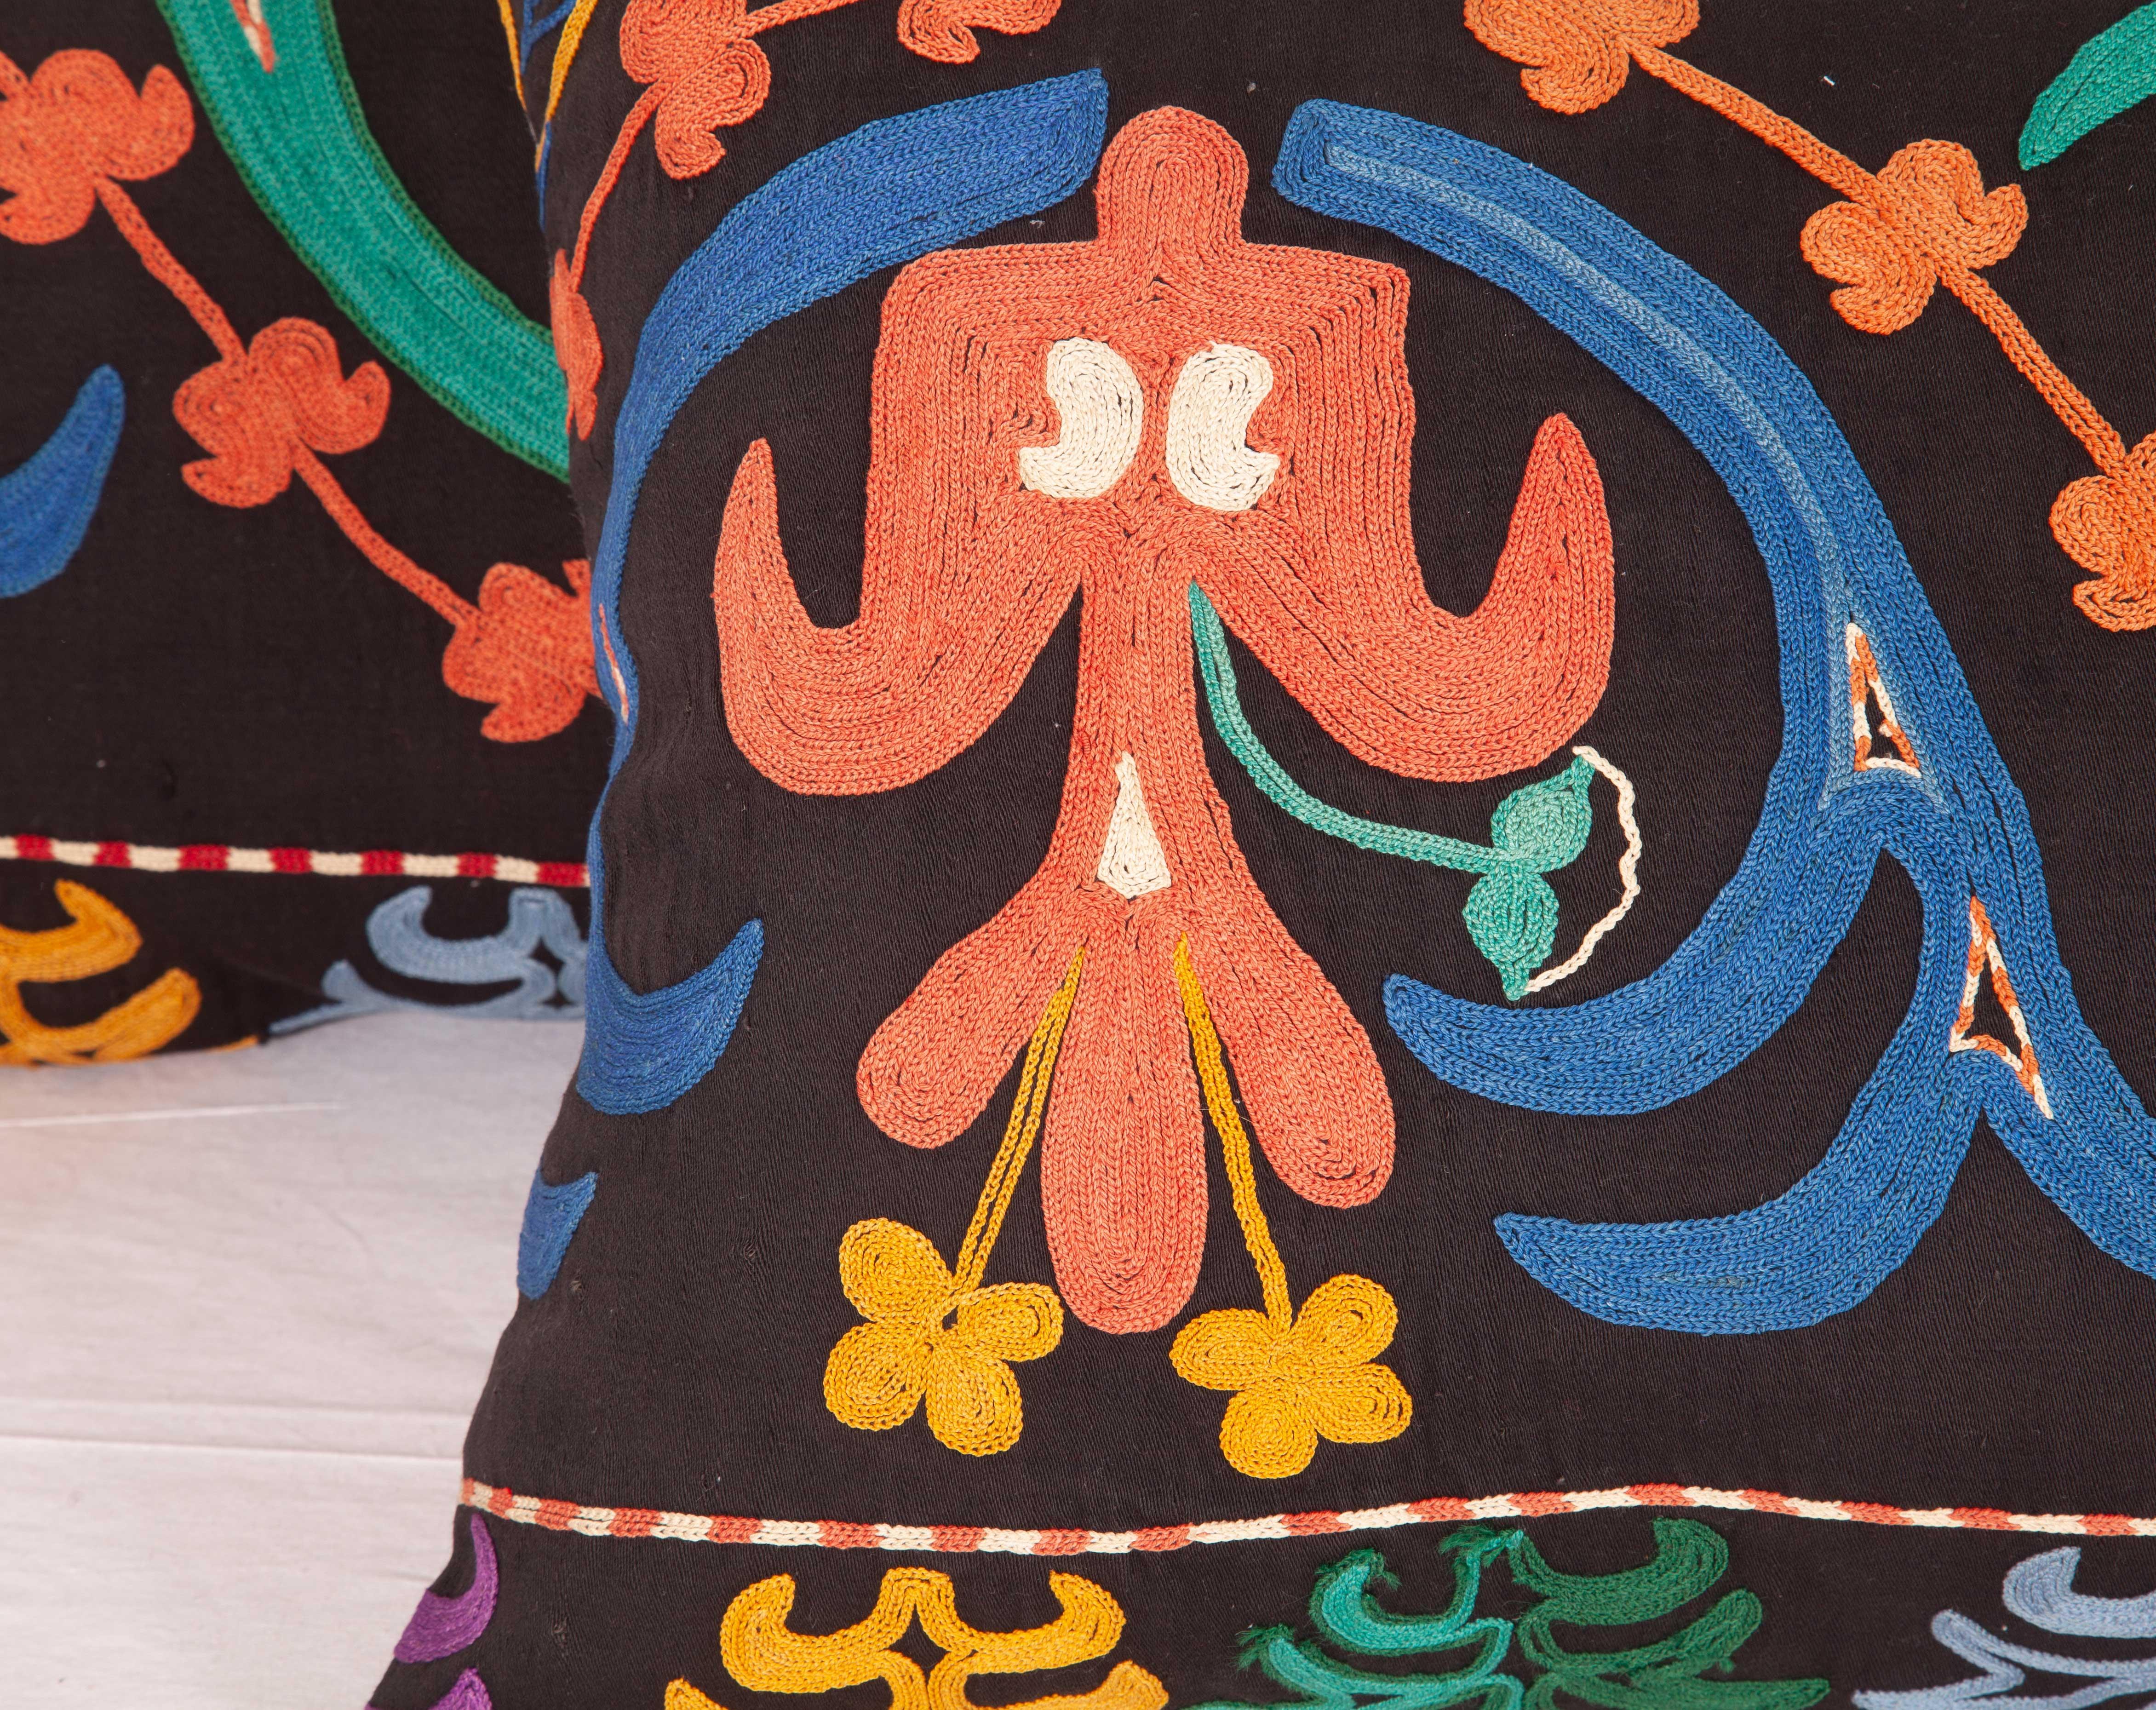 Suzani Kyrgyz Lumbar Pillow Cases Made from a Mid-20th Century Kyrgyz Embroidery